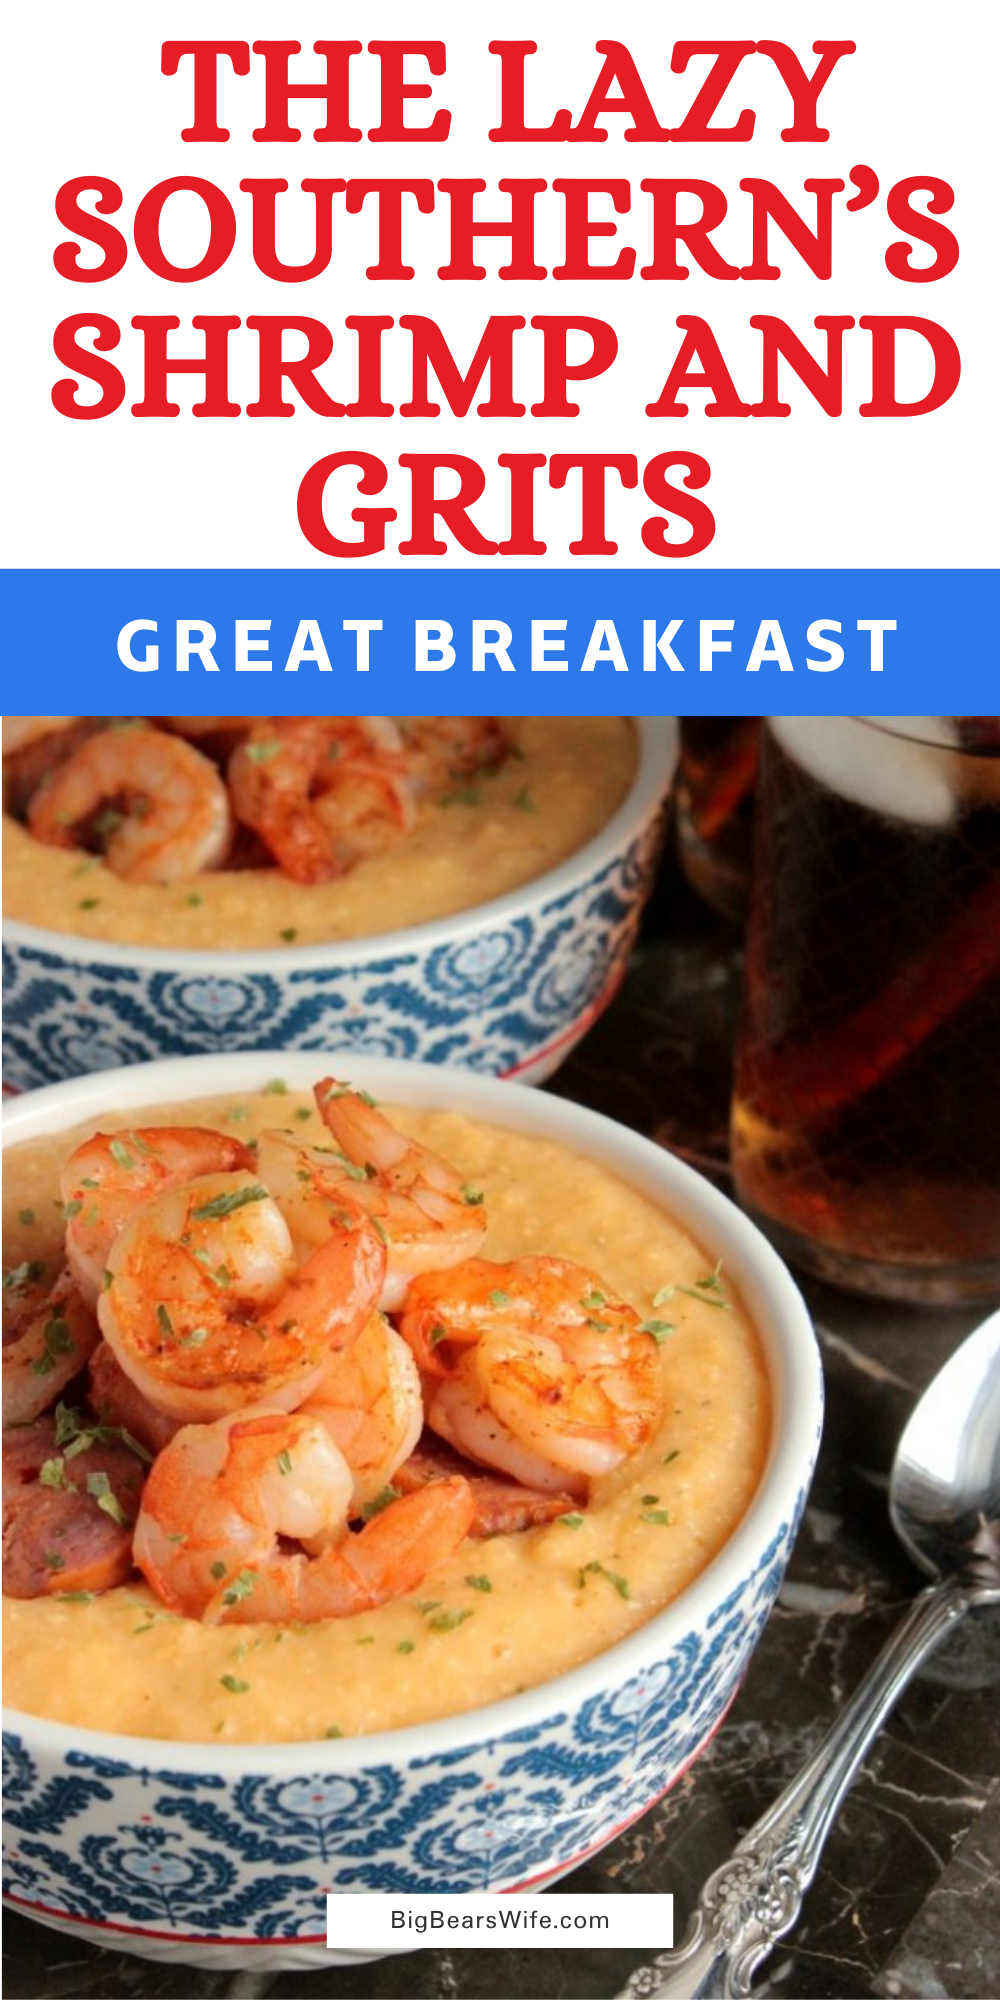  We love shrimp and grits but we need quick and simple after work! This is the version that we love when we're in a hurry or when we've had a super long day at work! We call this, "The Lazy Southern's Shrimp and Grits". via @bigbearswife